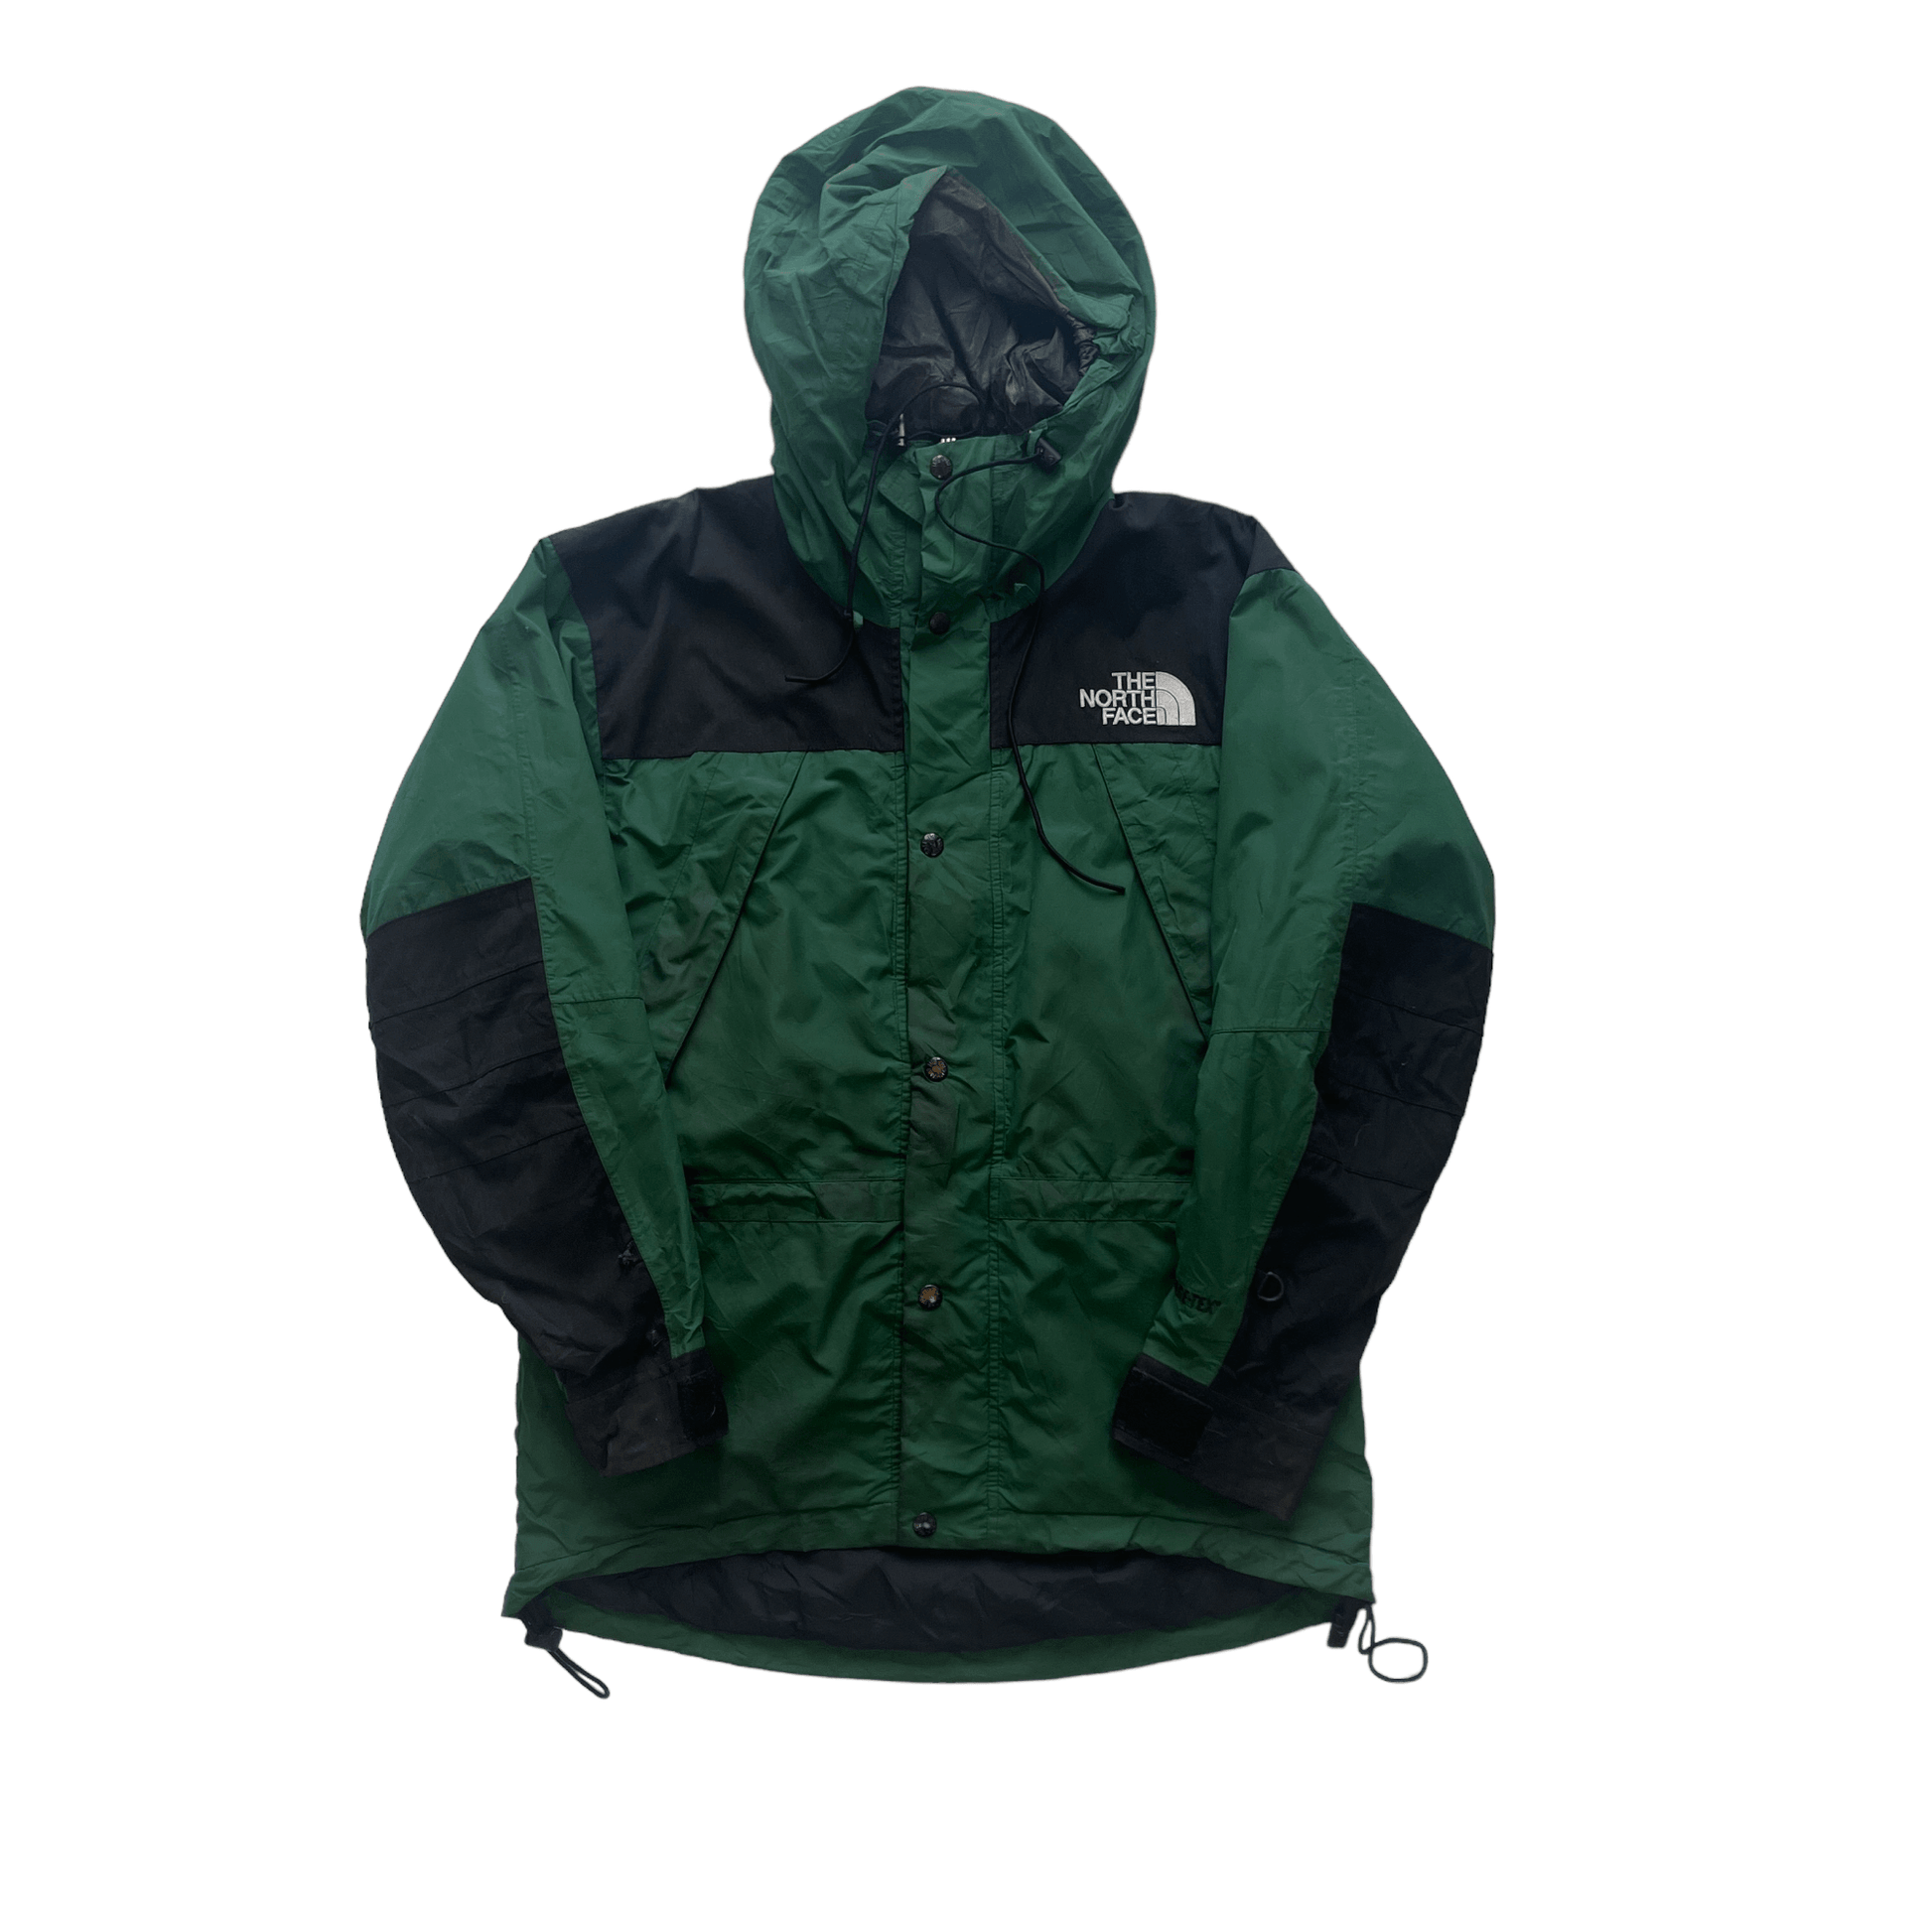 Vintage 90s Green + Black The North Face (TNF) Gore-Tex Jacket - Small - The Streetwear Studio